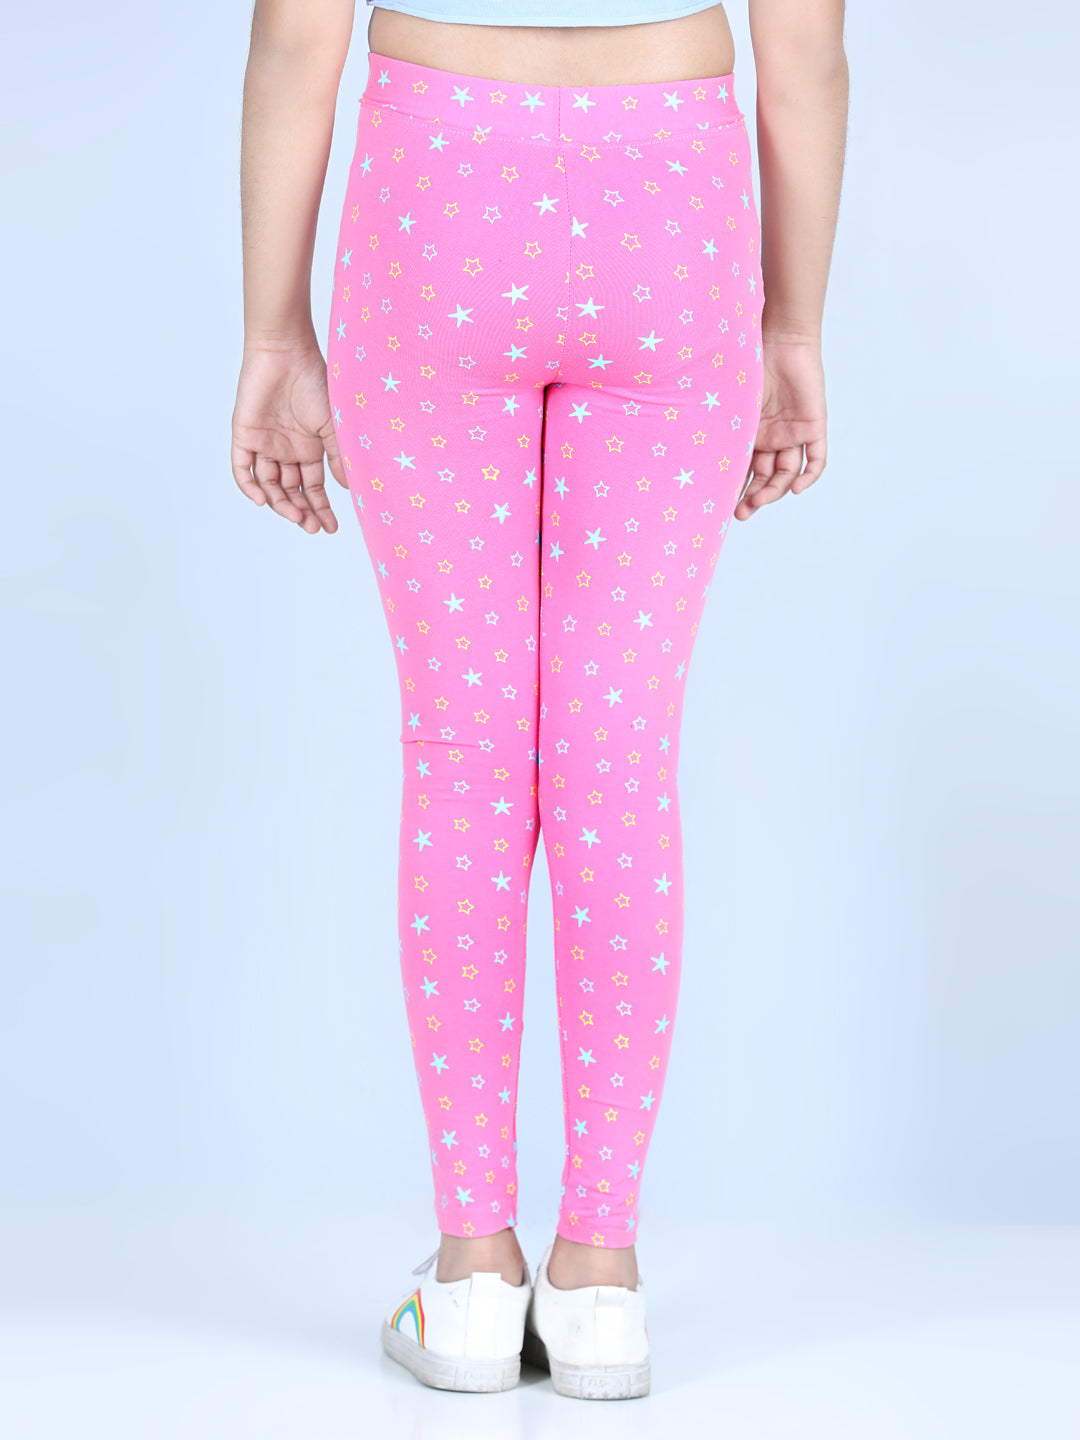 Girls Star Printed Leggings with Flat Waistband- Pink